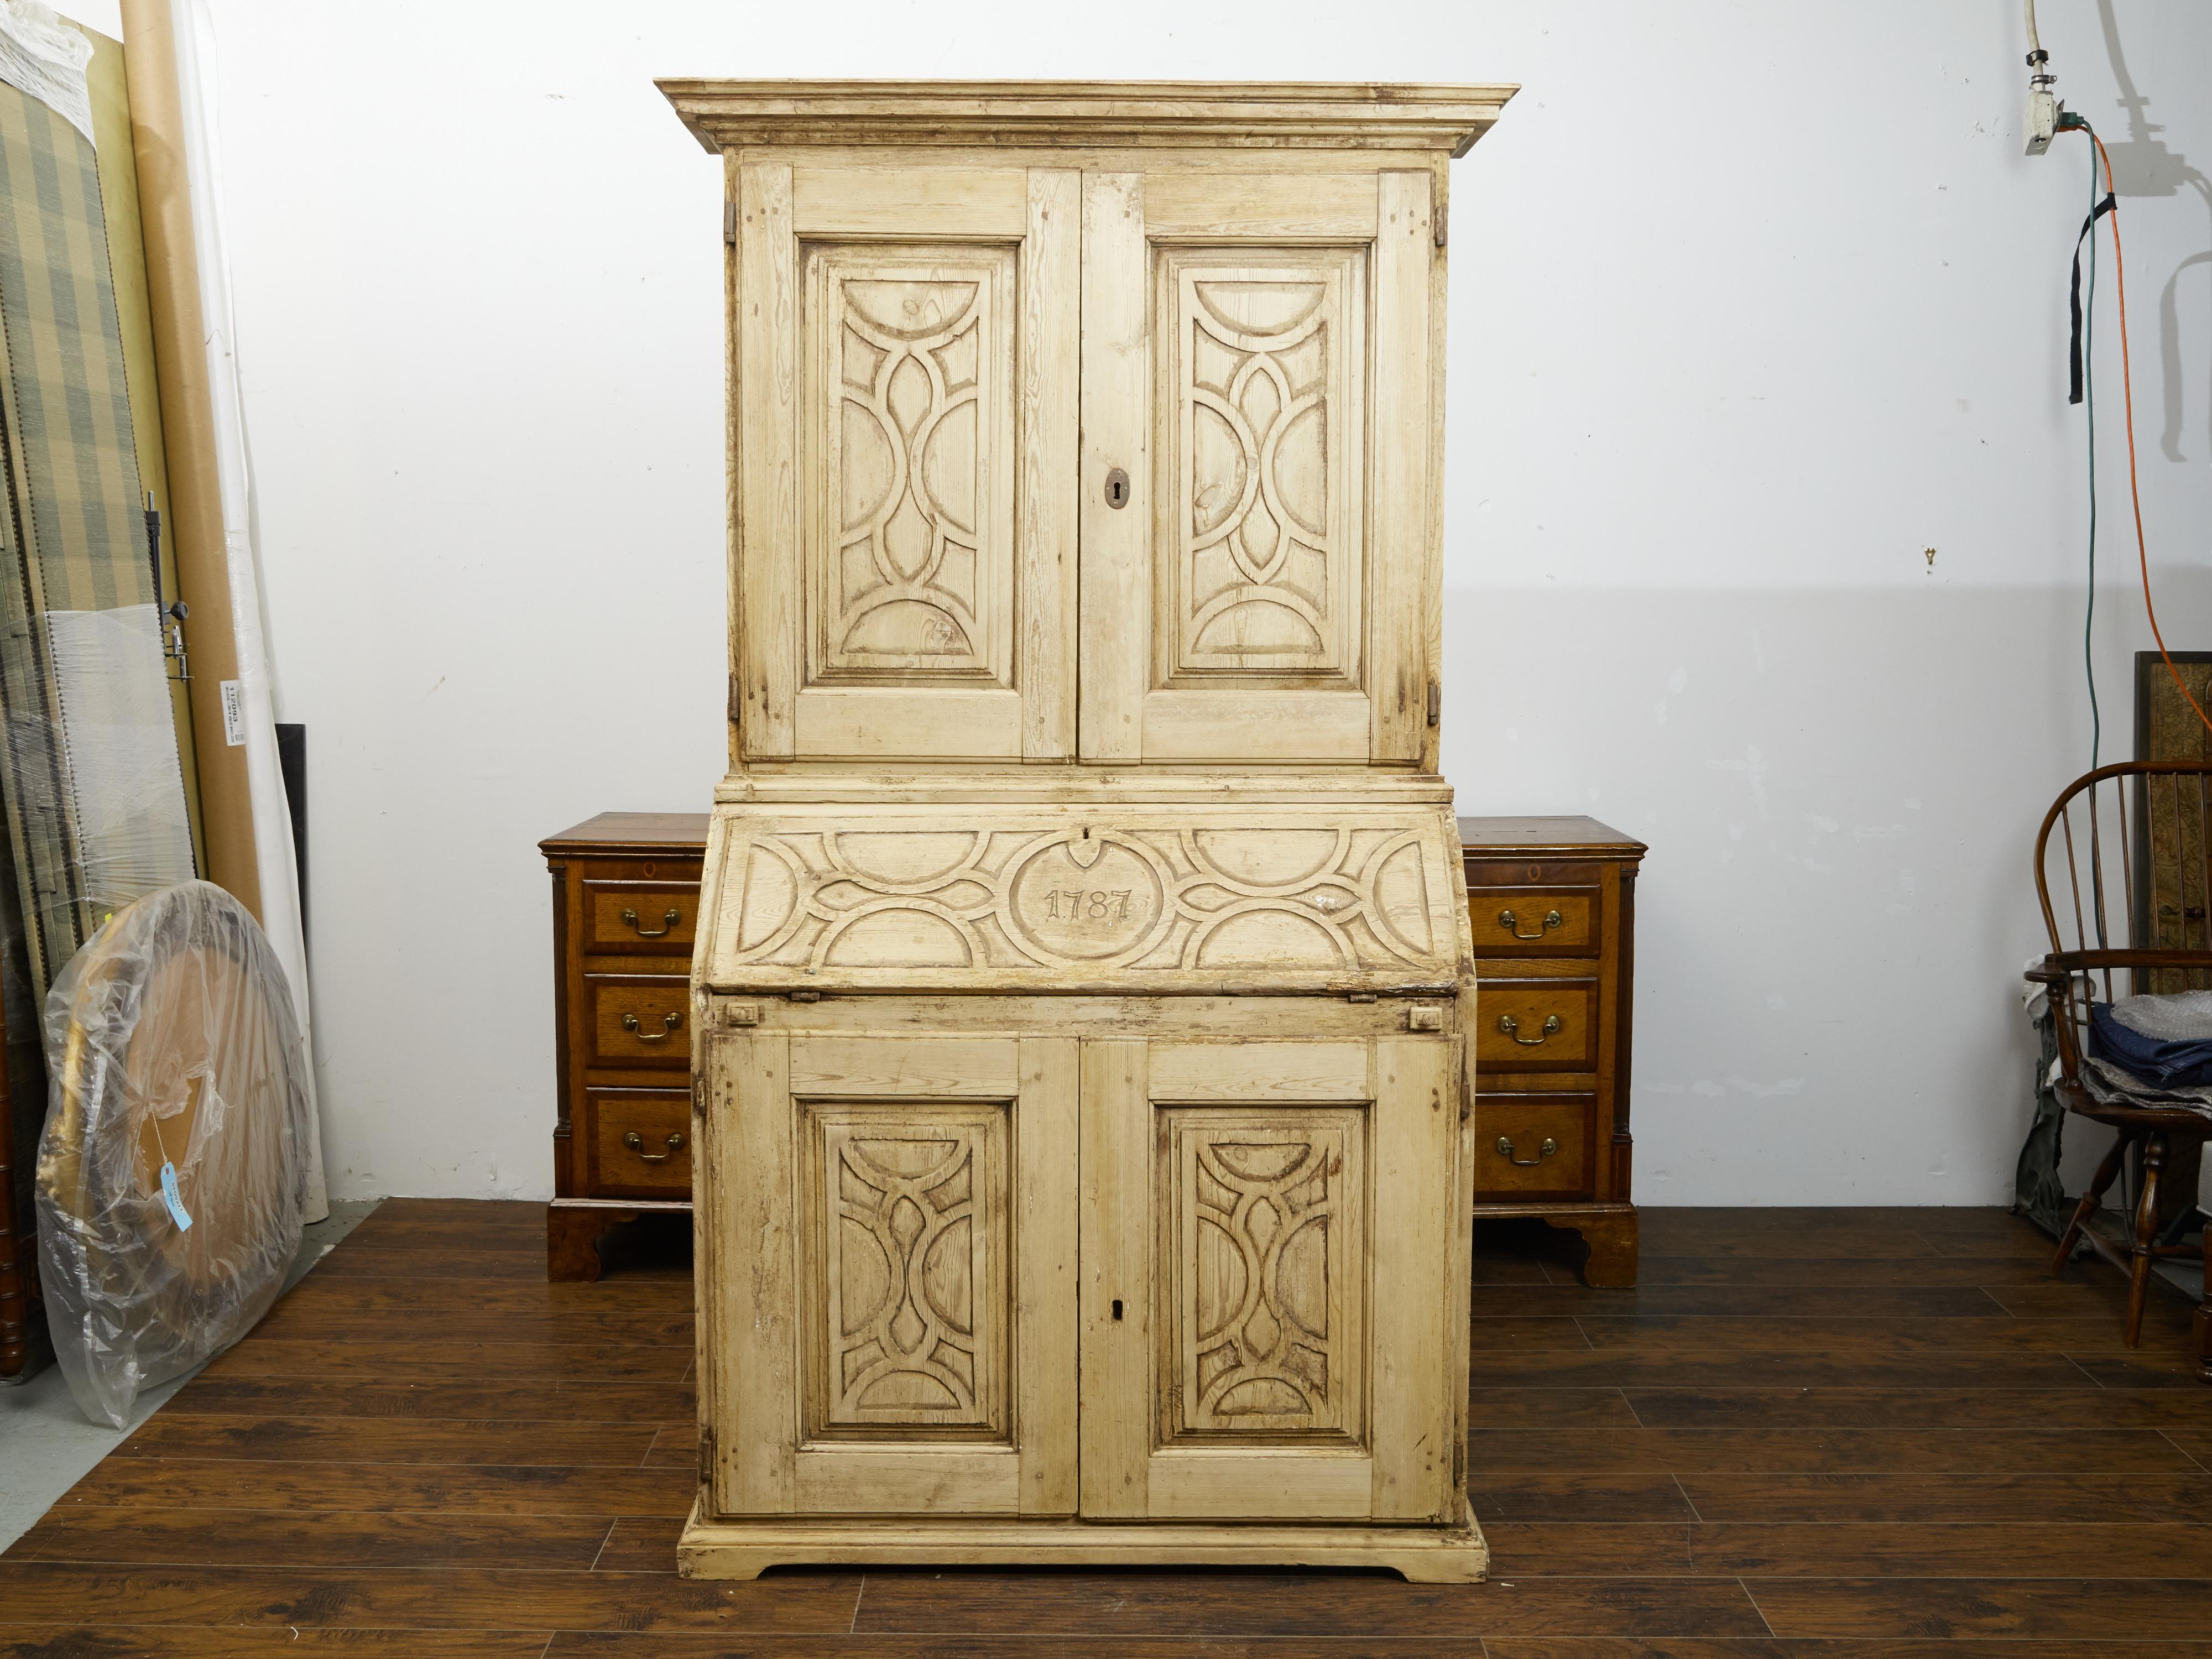 A Spanish pine tall secretaire from the late 18th century, with carved date, slanted desk and geometric panels. Created in Spain during the last quarter of the 18th century, this tall pine secretaire features a molded cornice sitting above two doors